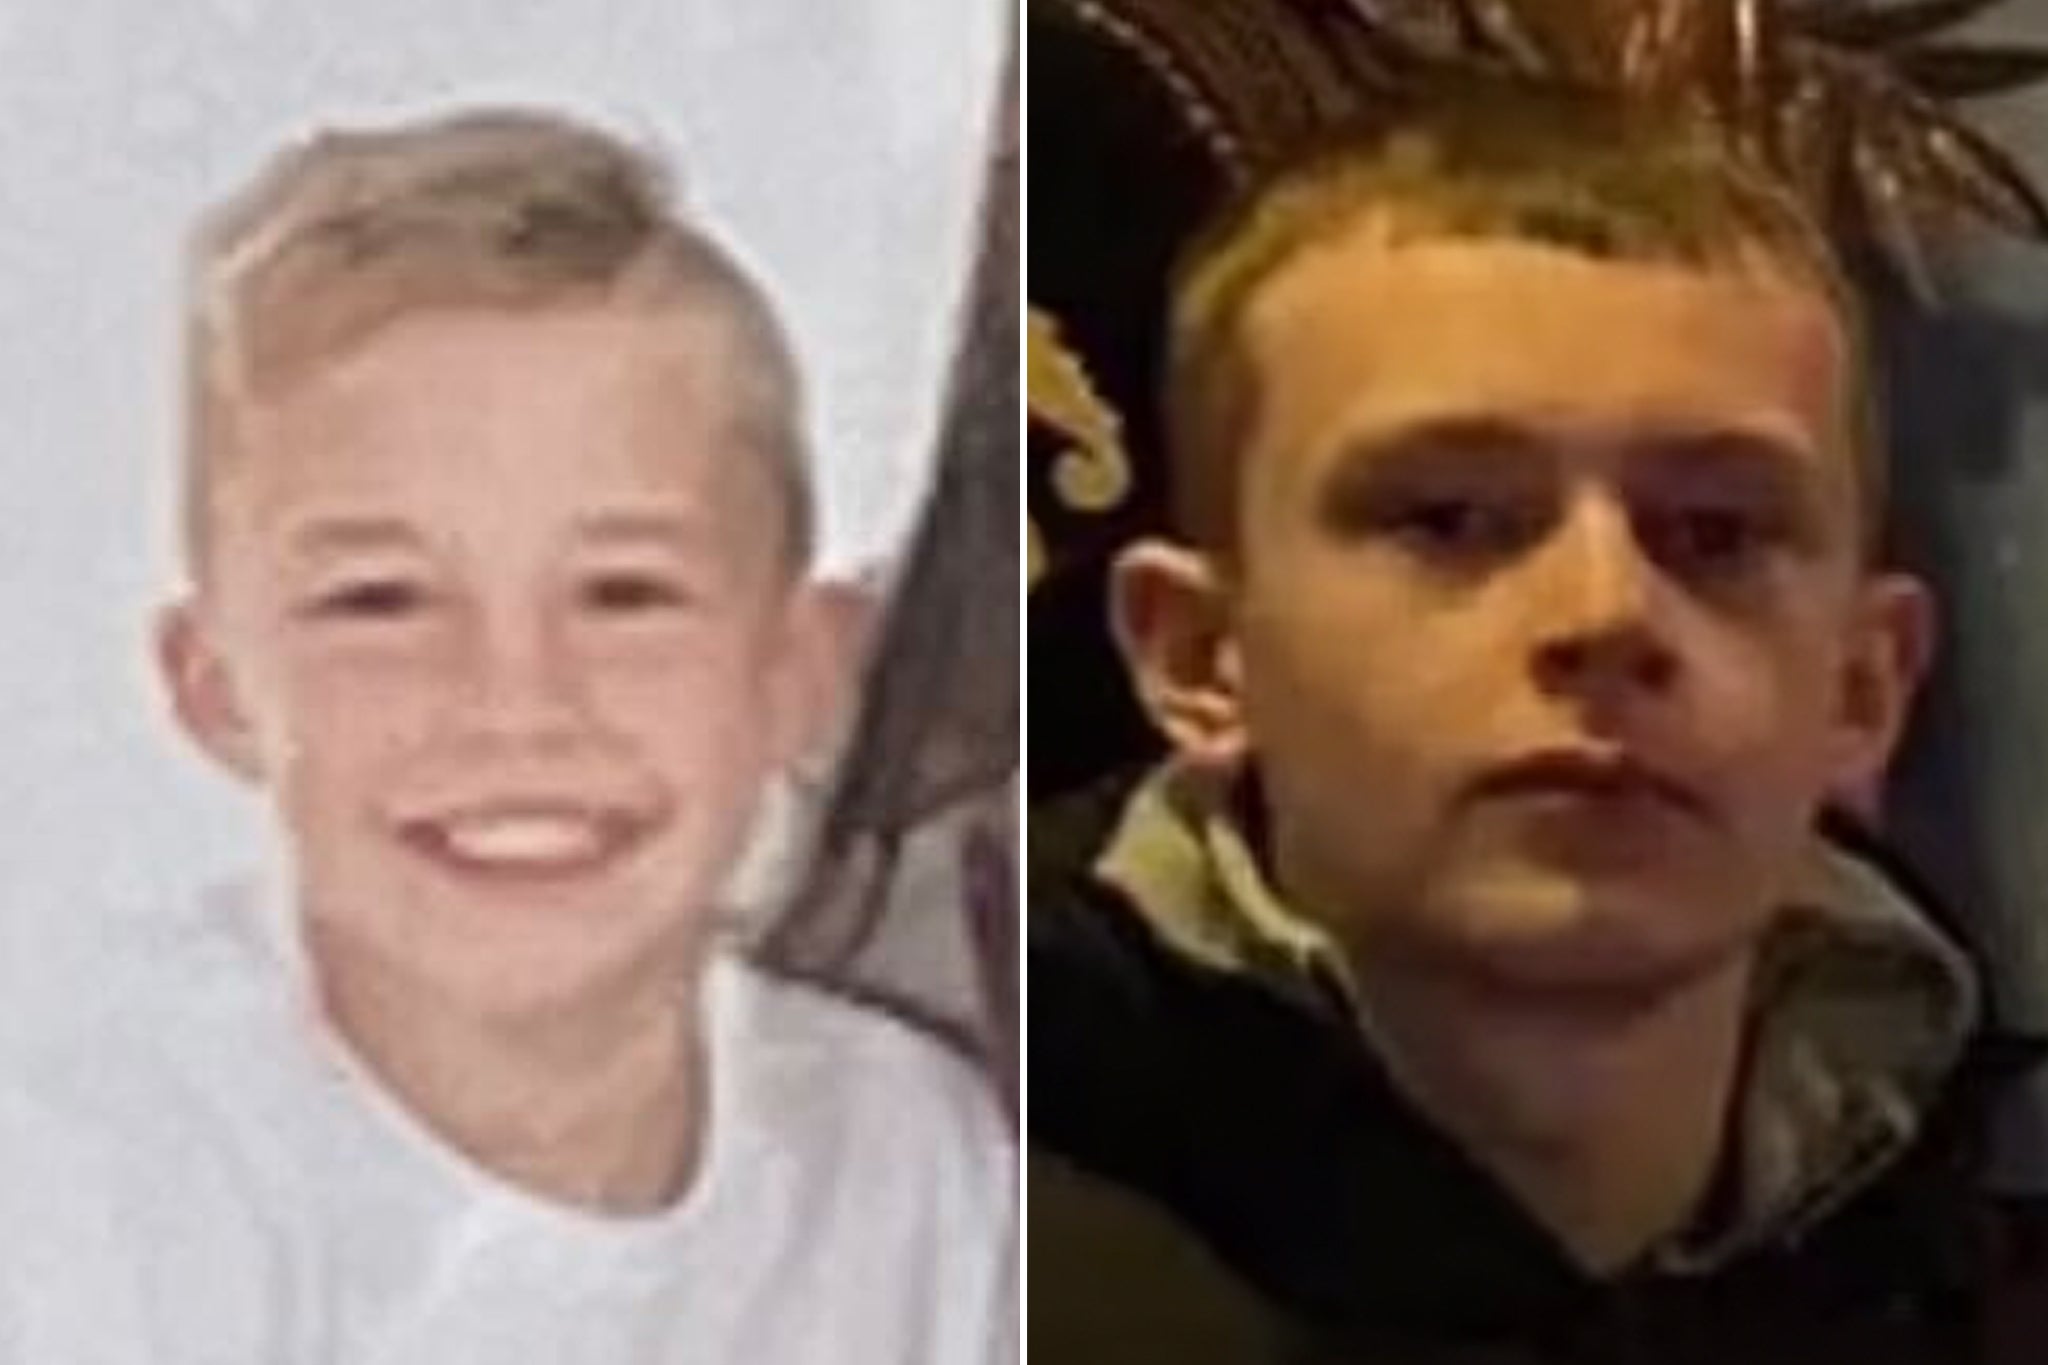 Tributes have been paid to victims Max and Mason